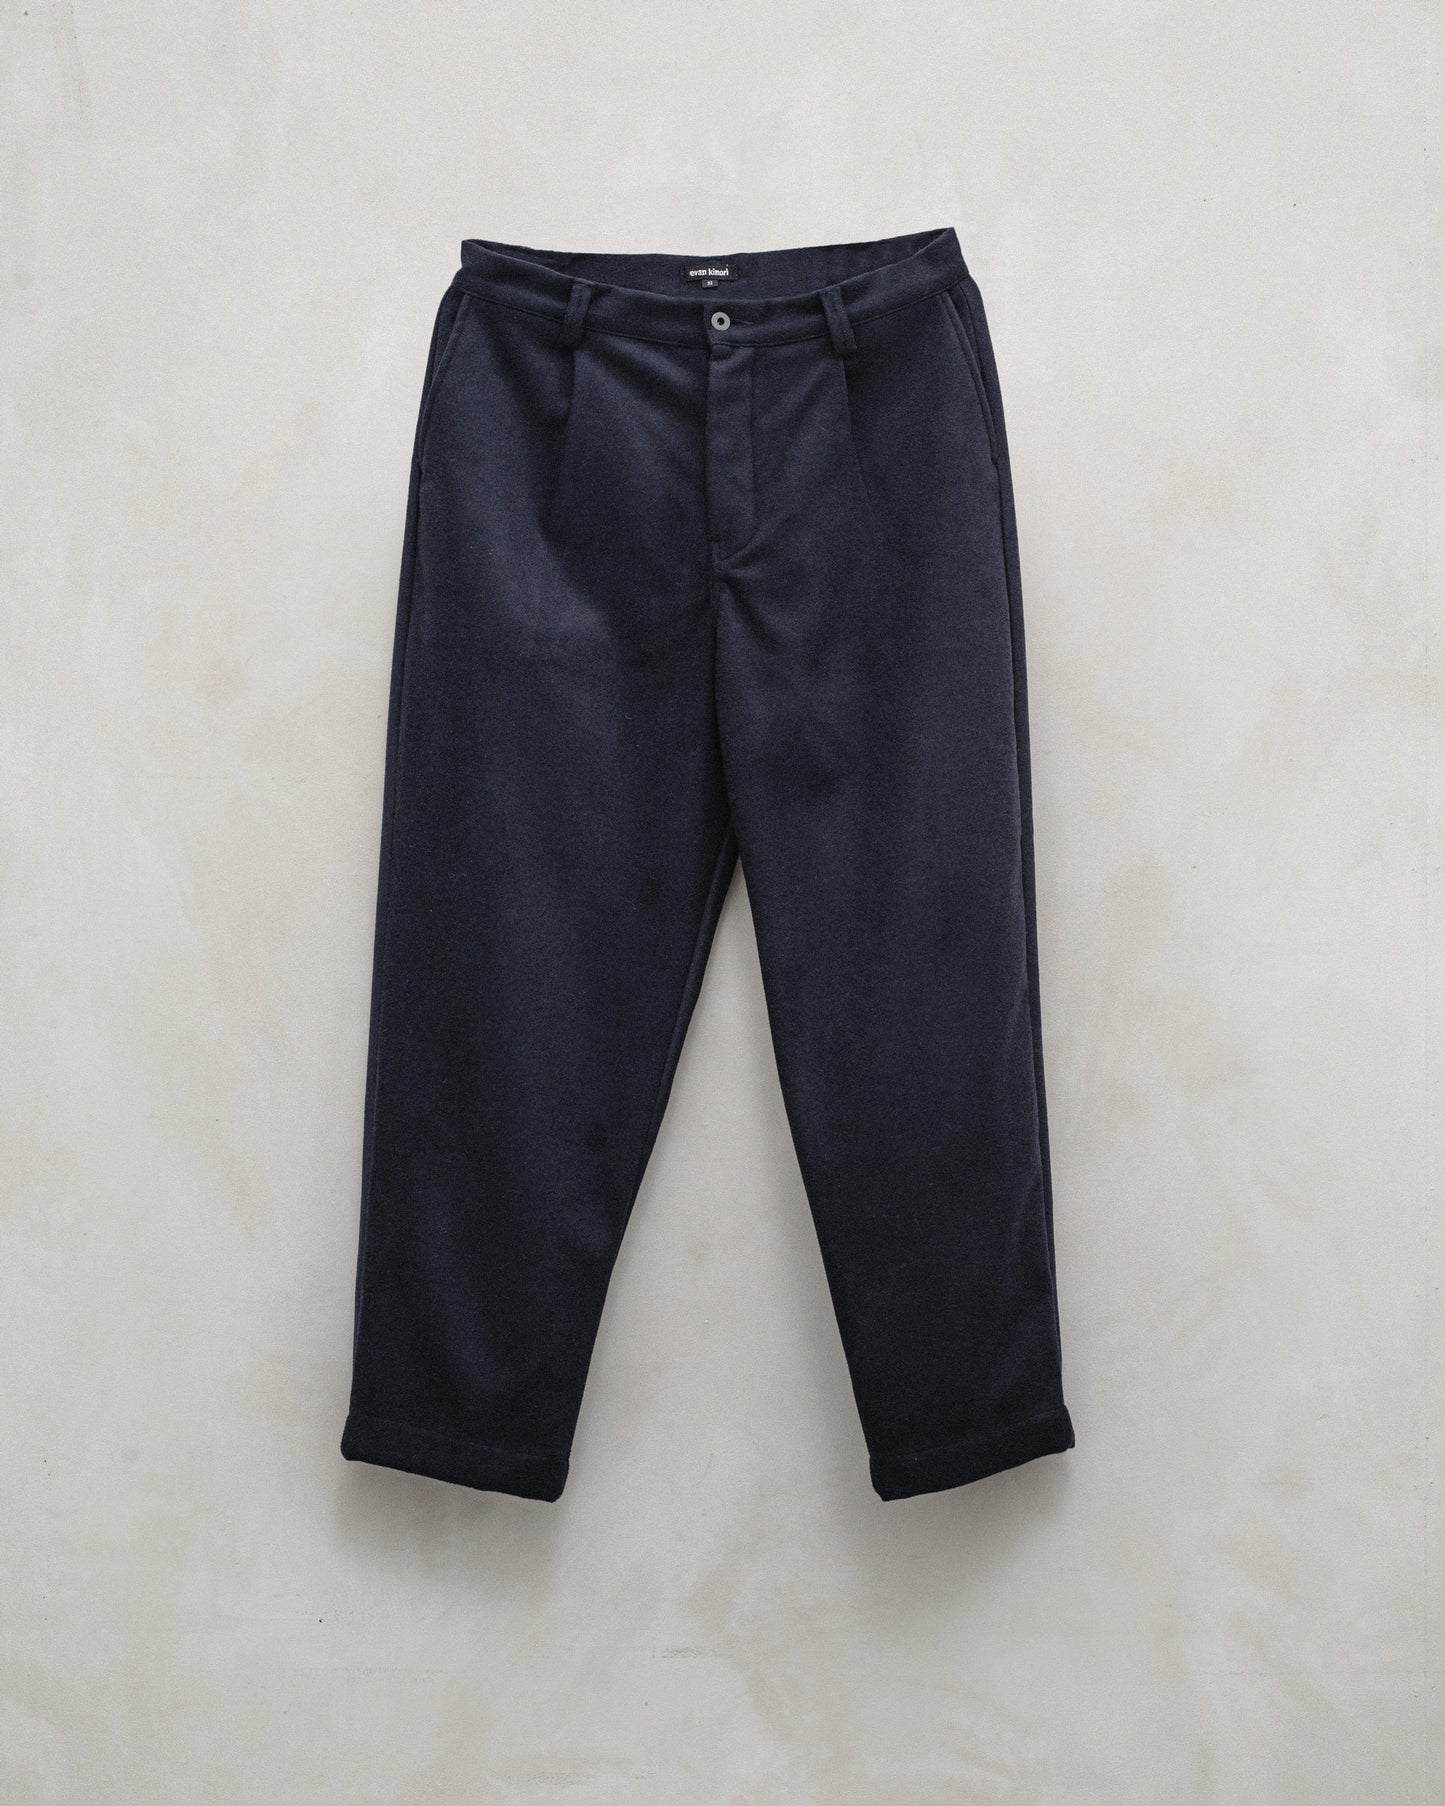 Single Pleat Pant - Brushed Wool/Cashmere Flannel, Navy